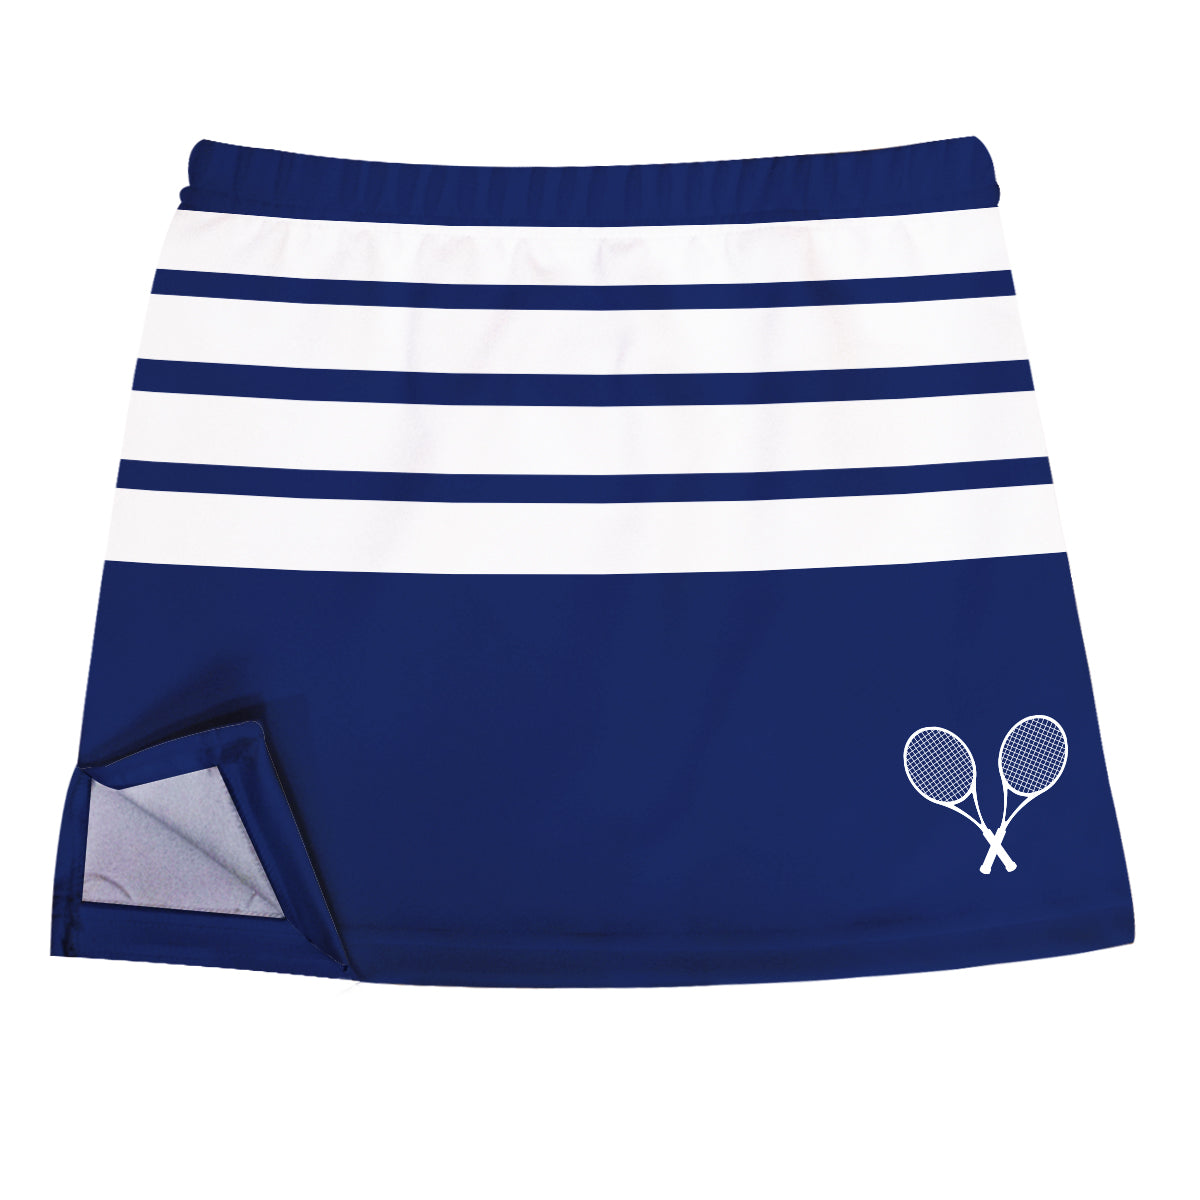 Tennis Racquets Navy and White Stripes Skirt With Side Vents - Wimziy&Co.